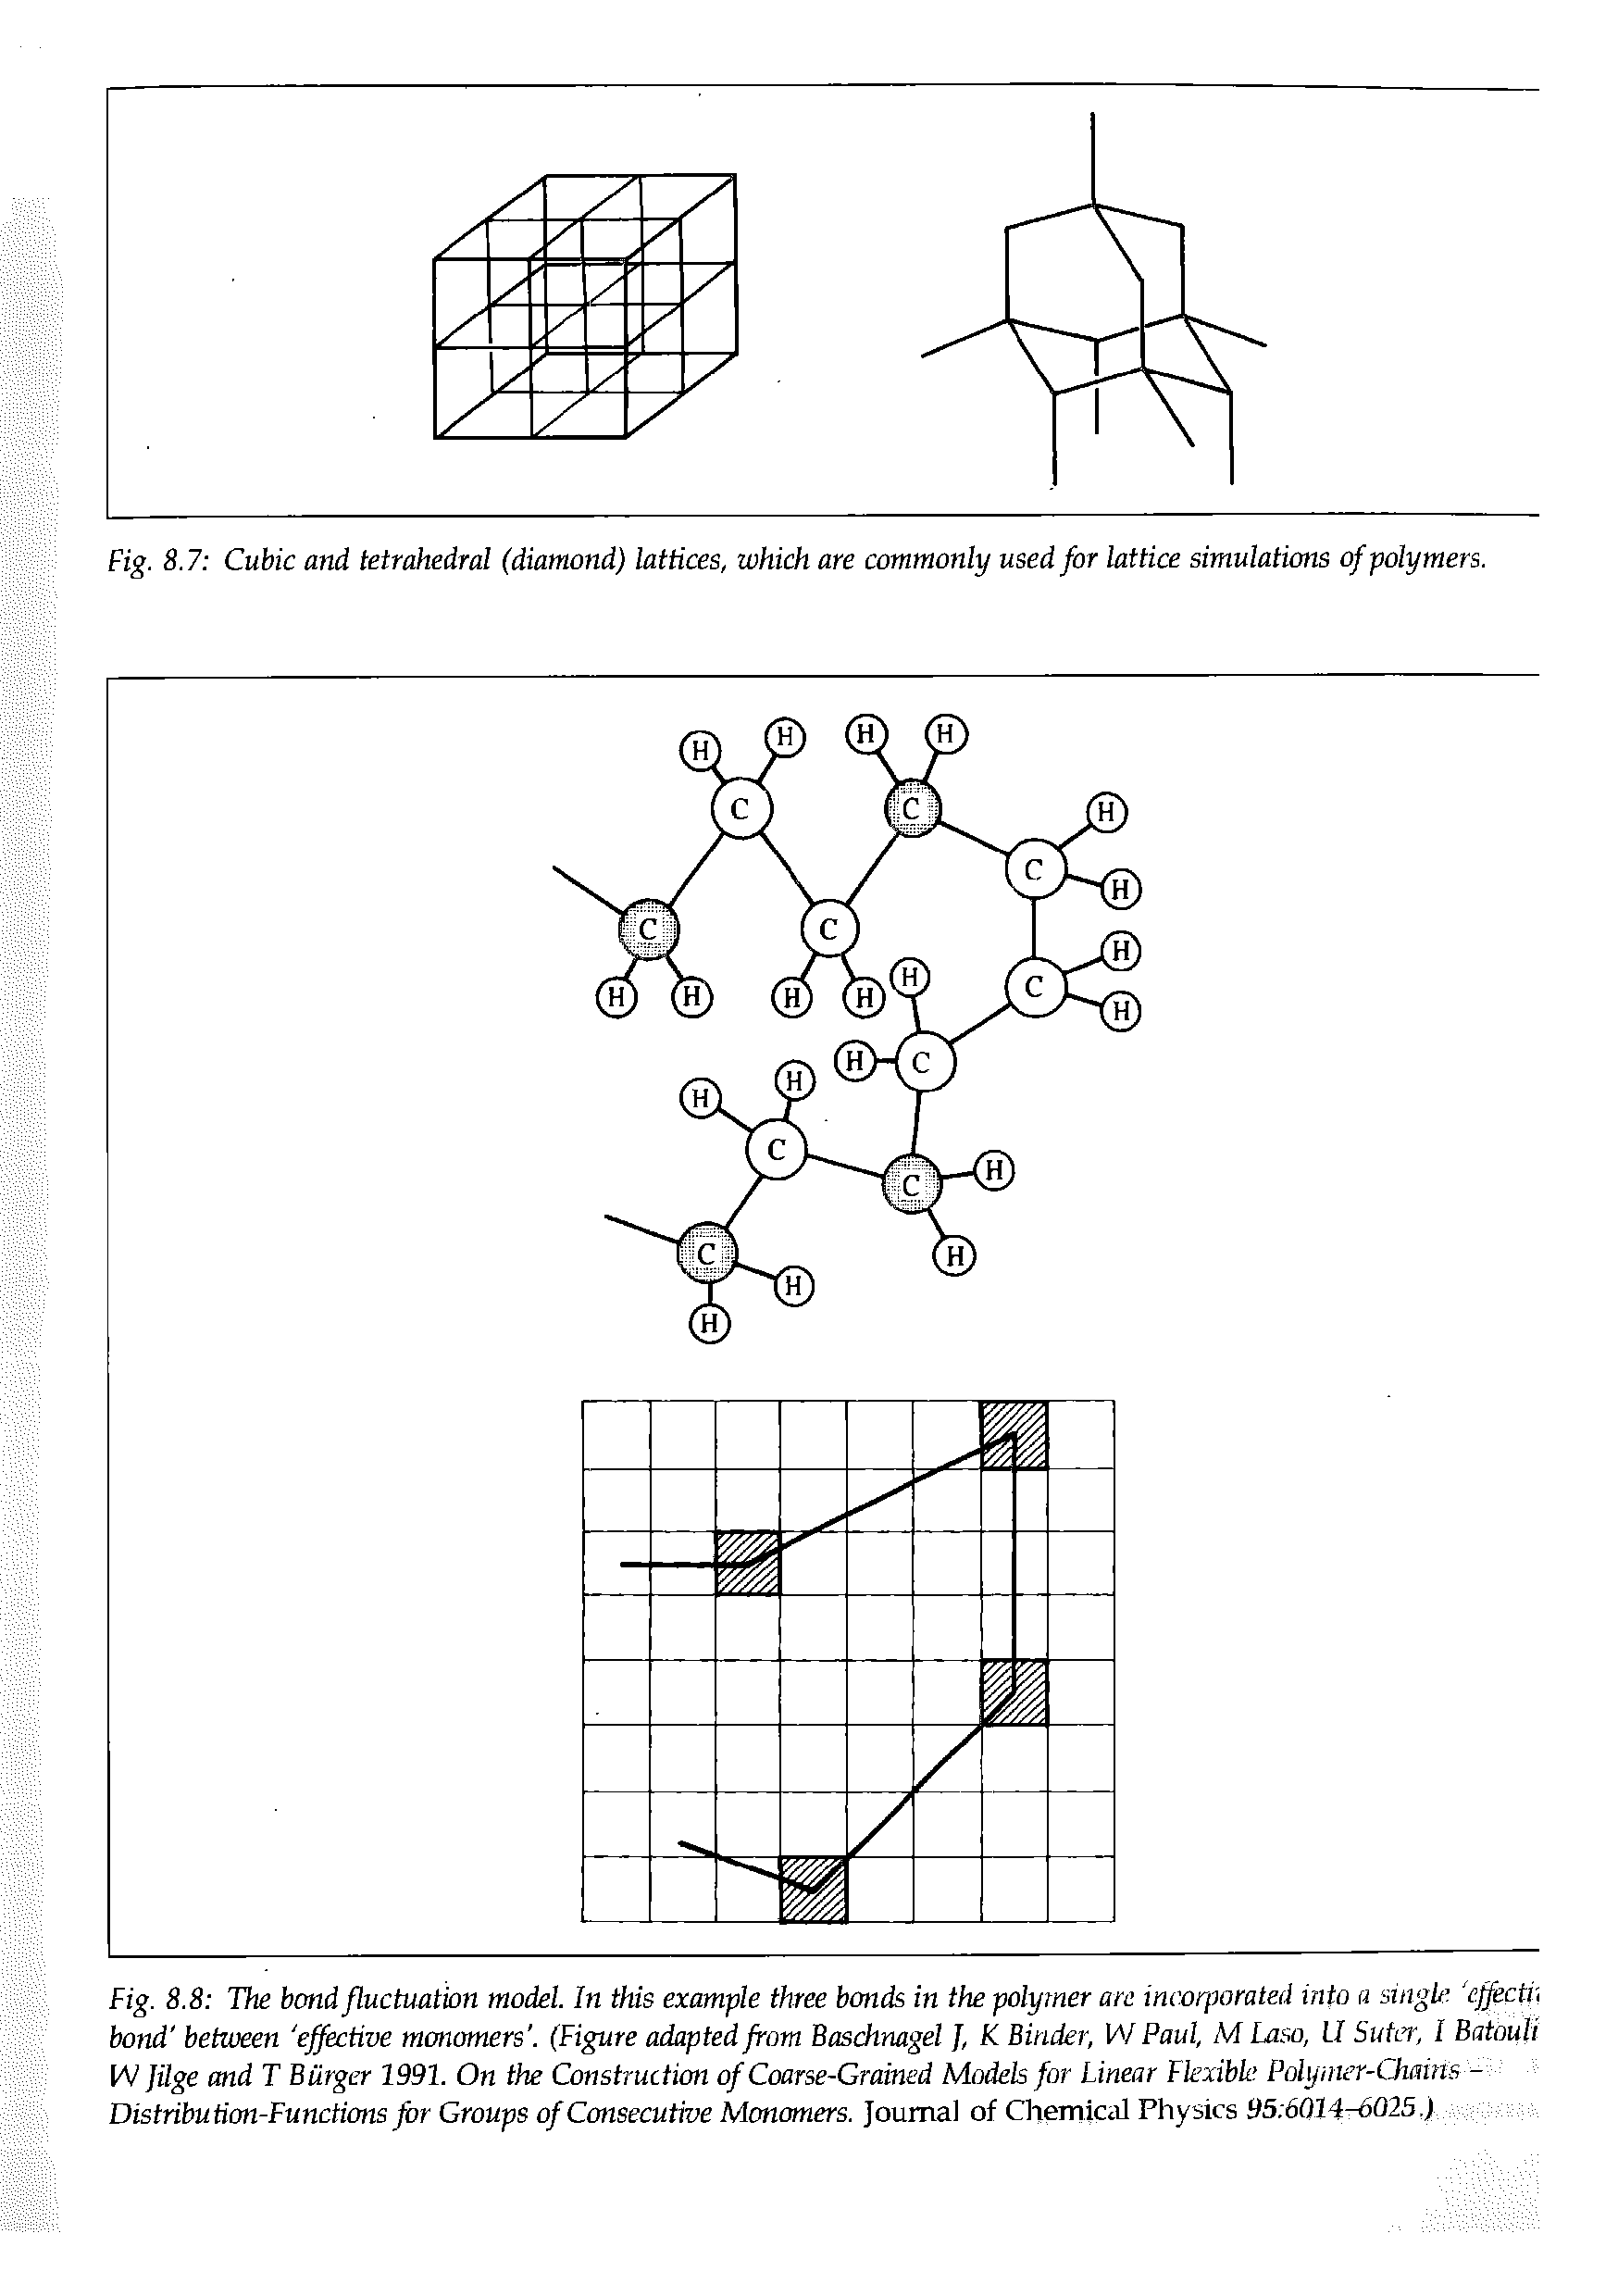 Fig. 8.8 The bond fluctuation model. In this example three bcmds in the polymer arc incorporated into a singk effecti bond between effective moncmers . (Figure adapted from Baschnagel J, K Binder, W Paul, M Laso, U Sutcr, I Batouli [N ]ilge and T Burger 1991. On the Construction of Coarse-Grained Models for Linear Flexible Polymer-Chains -Distribution-Functions for Groups of Consecutive Monomers. Journal of Chemical Physics 93 6014-6025.)...